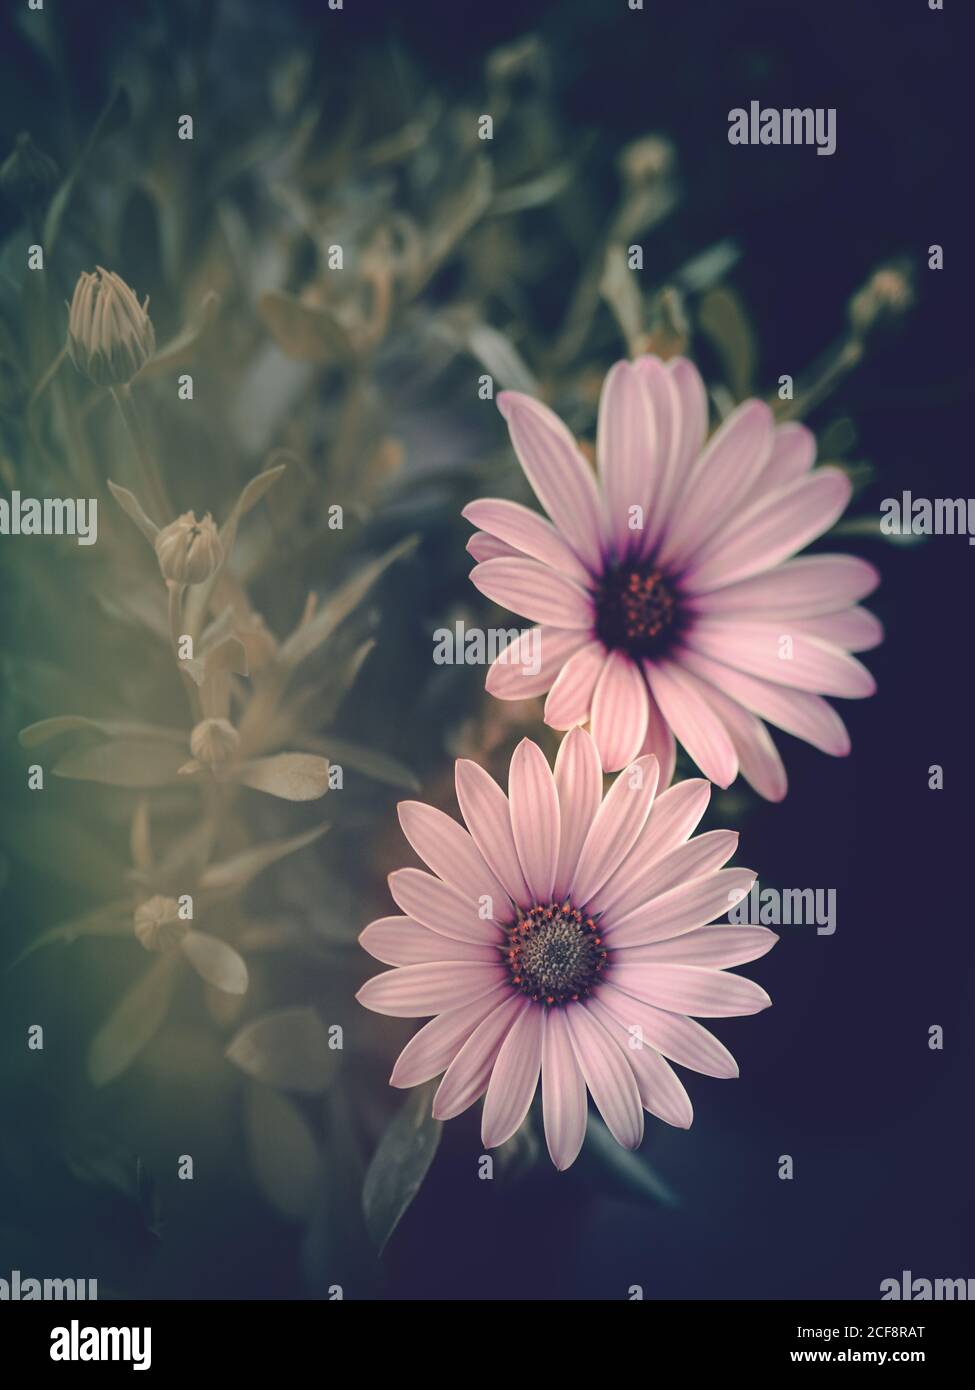 From above houseplant blooming with cute pink flowers against black background Stock Photo